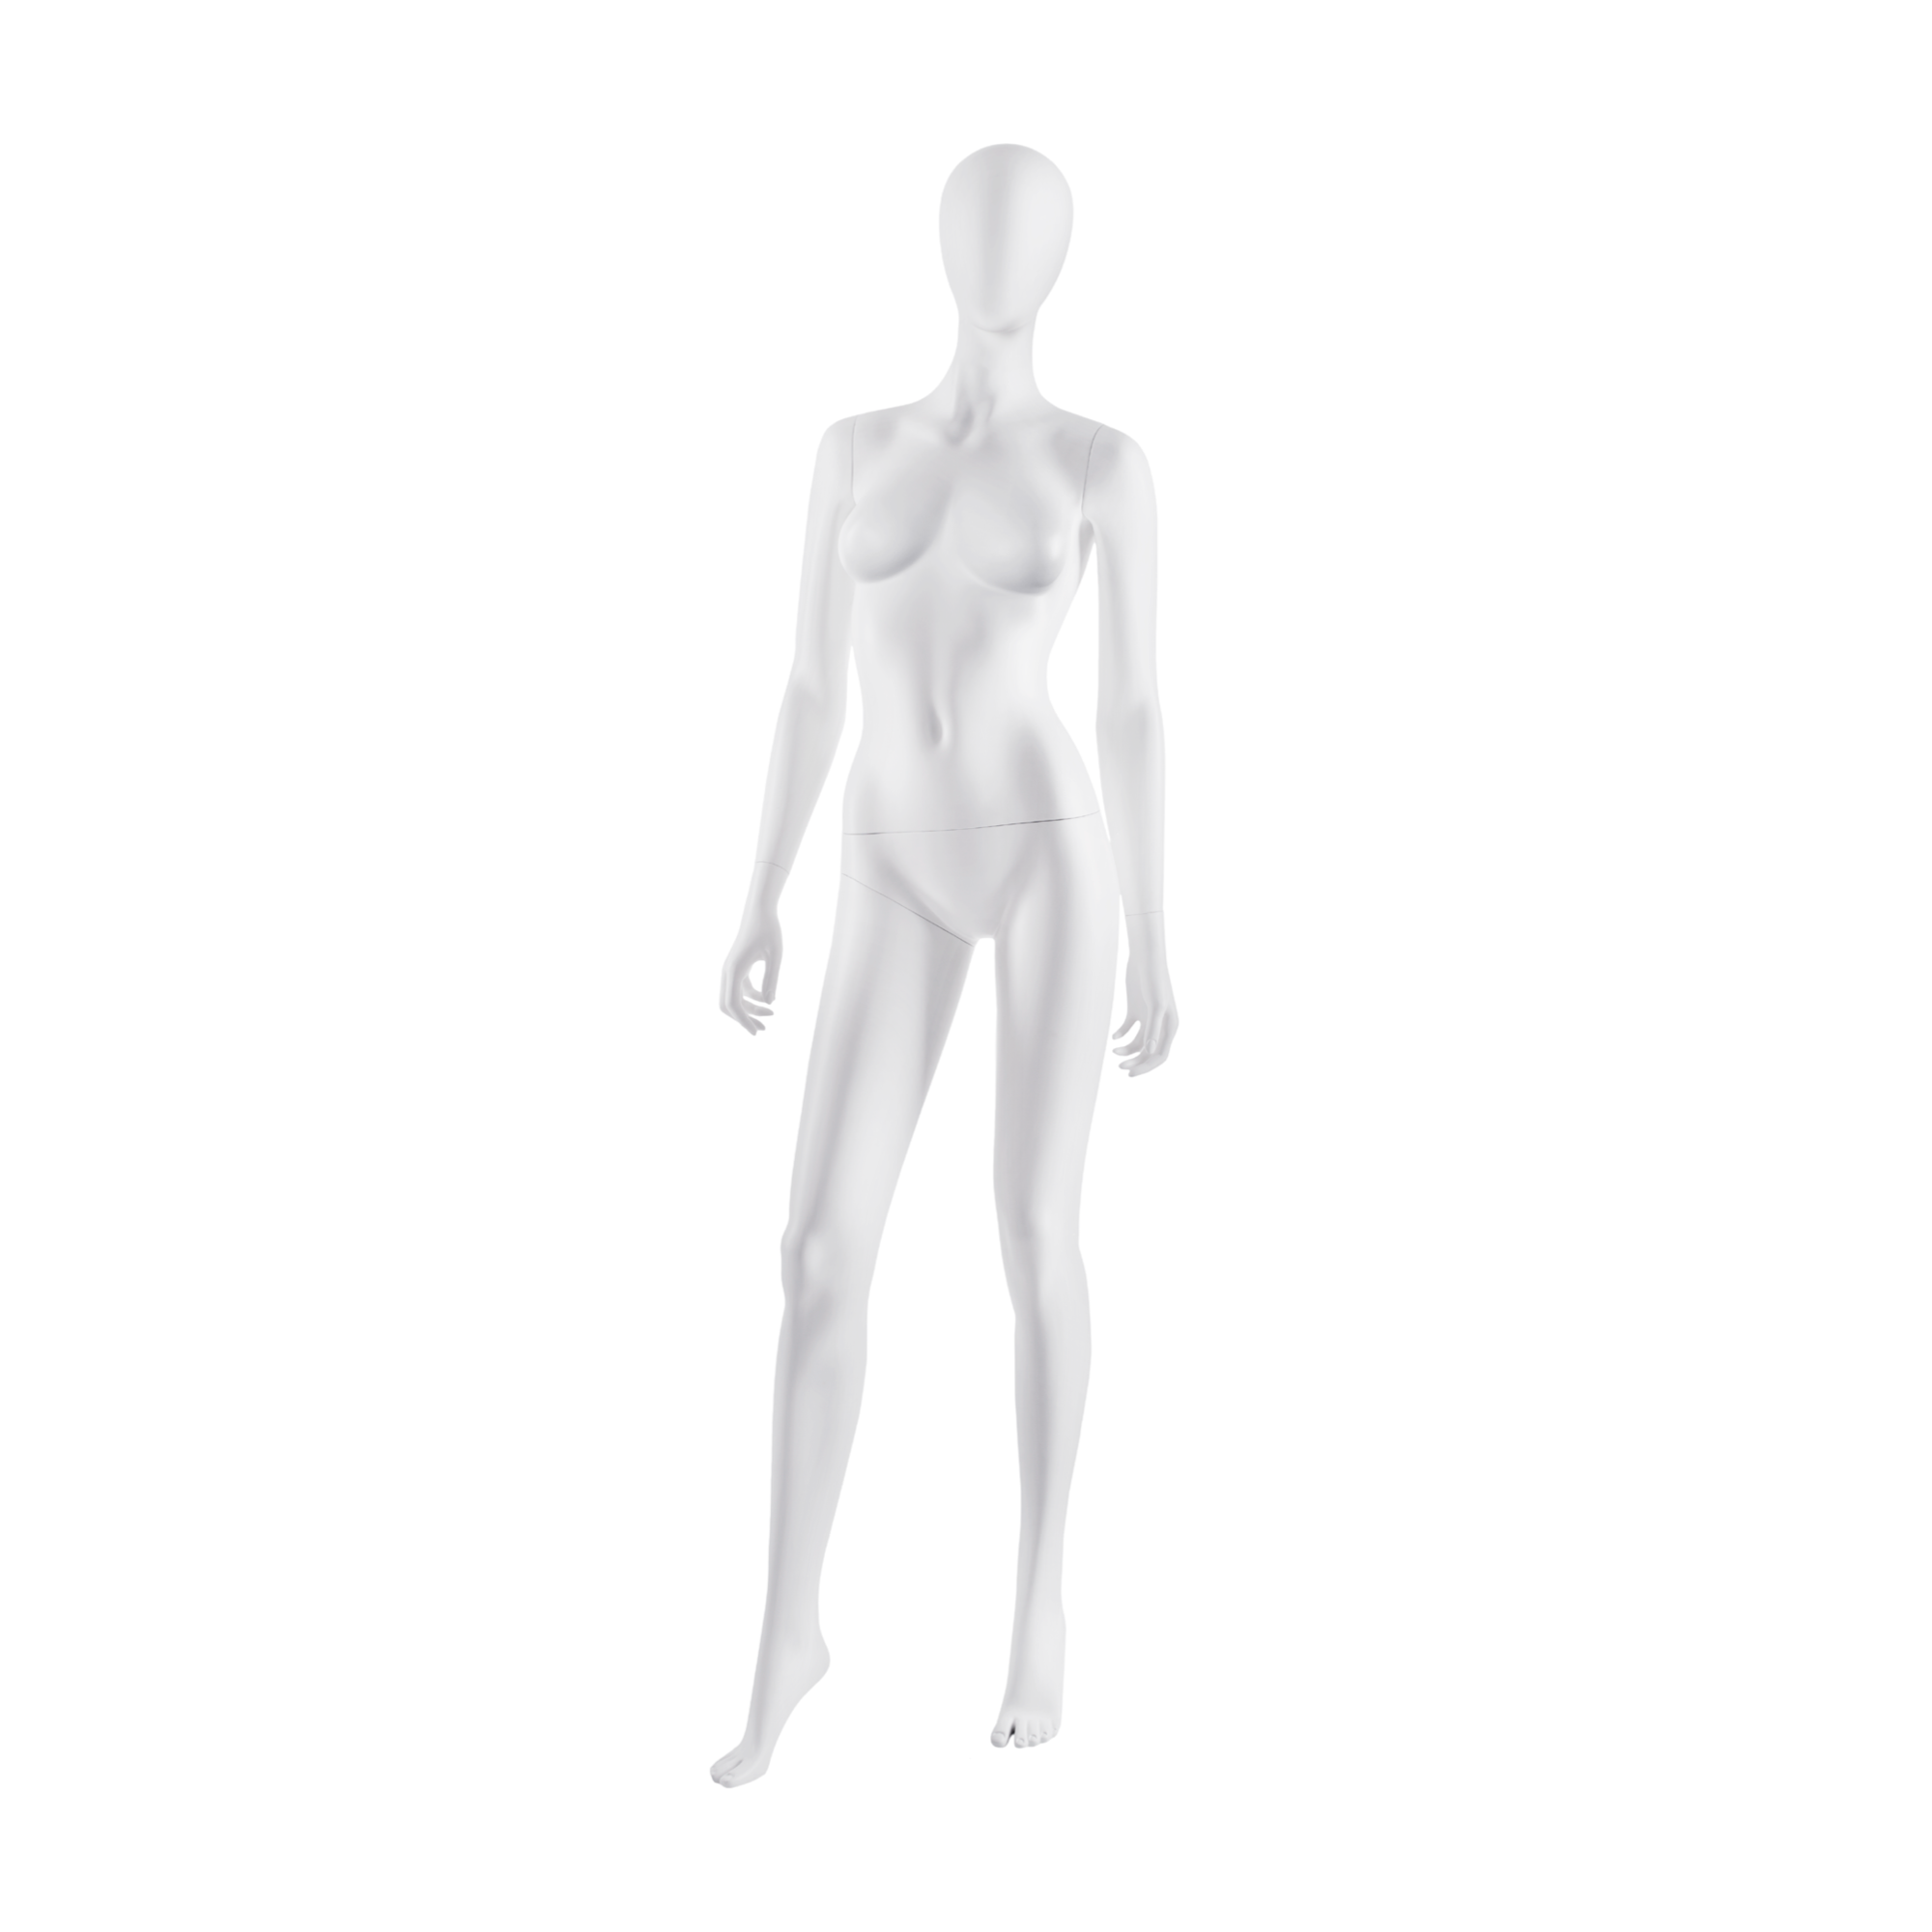 Abstract female mannequin No. 900-F3 - 900 Series line